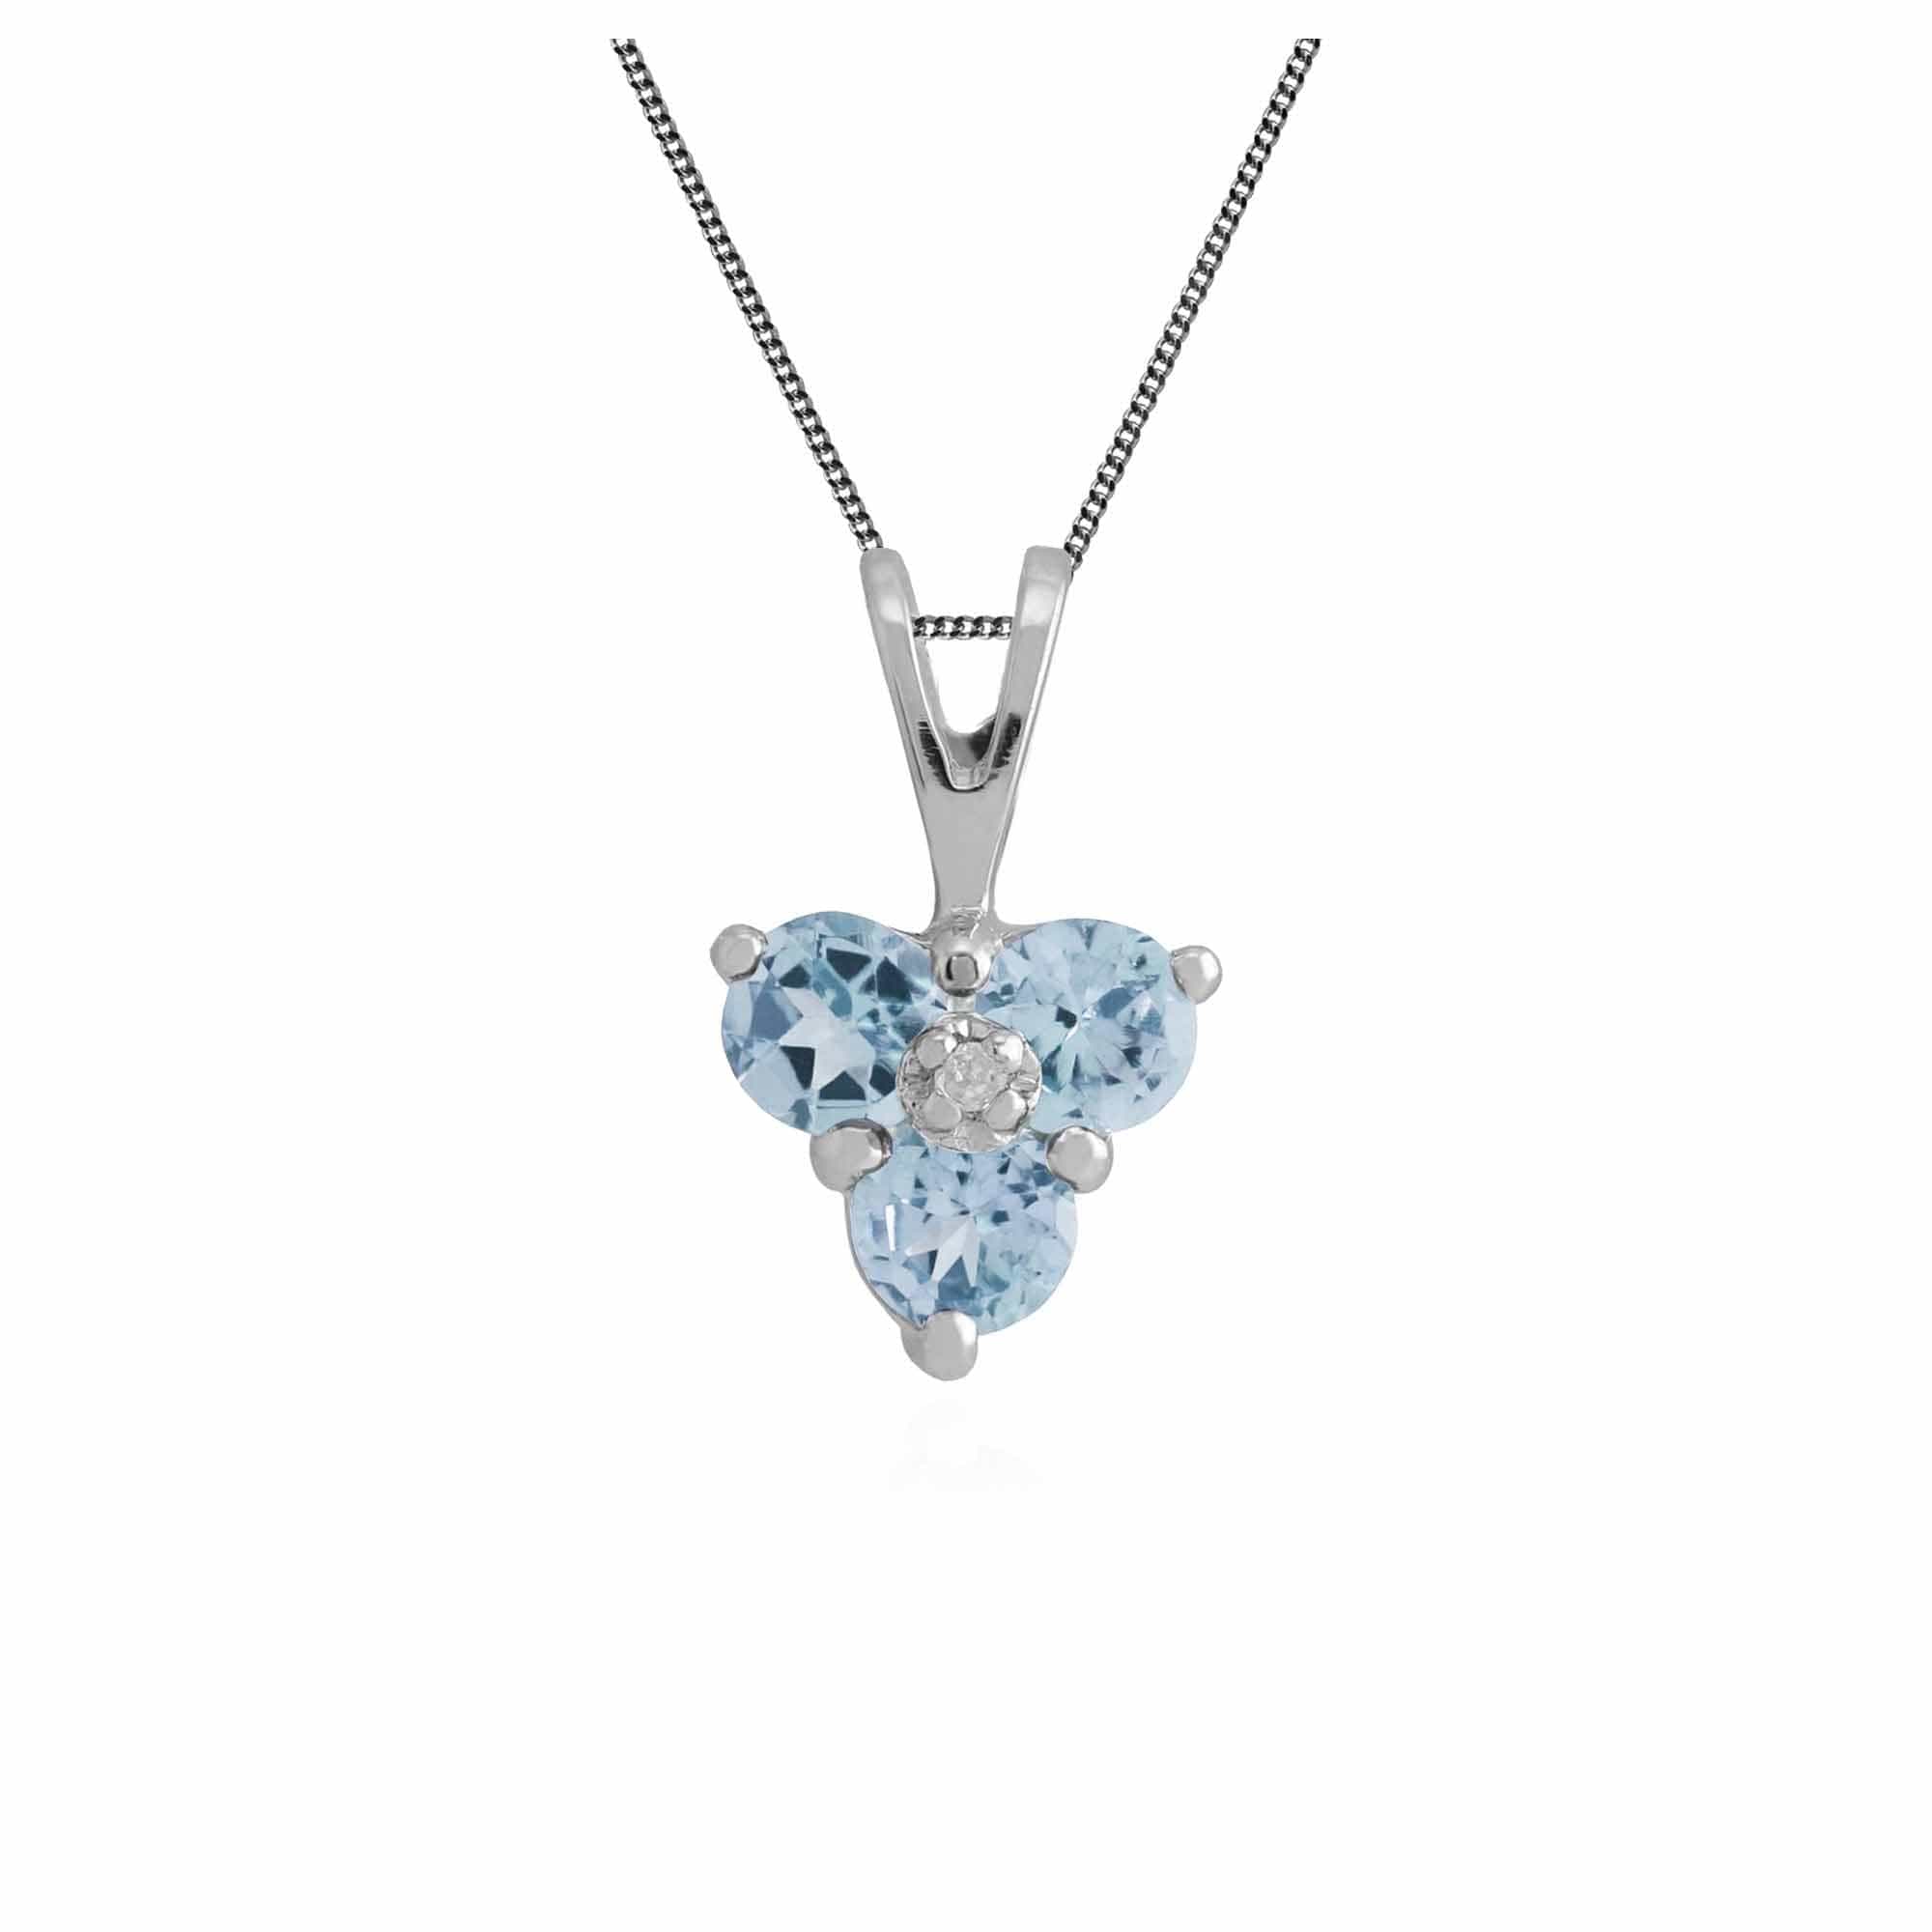 Blue topaz and diamond trilogy pendant in white gold